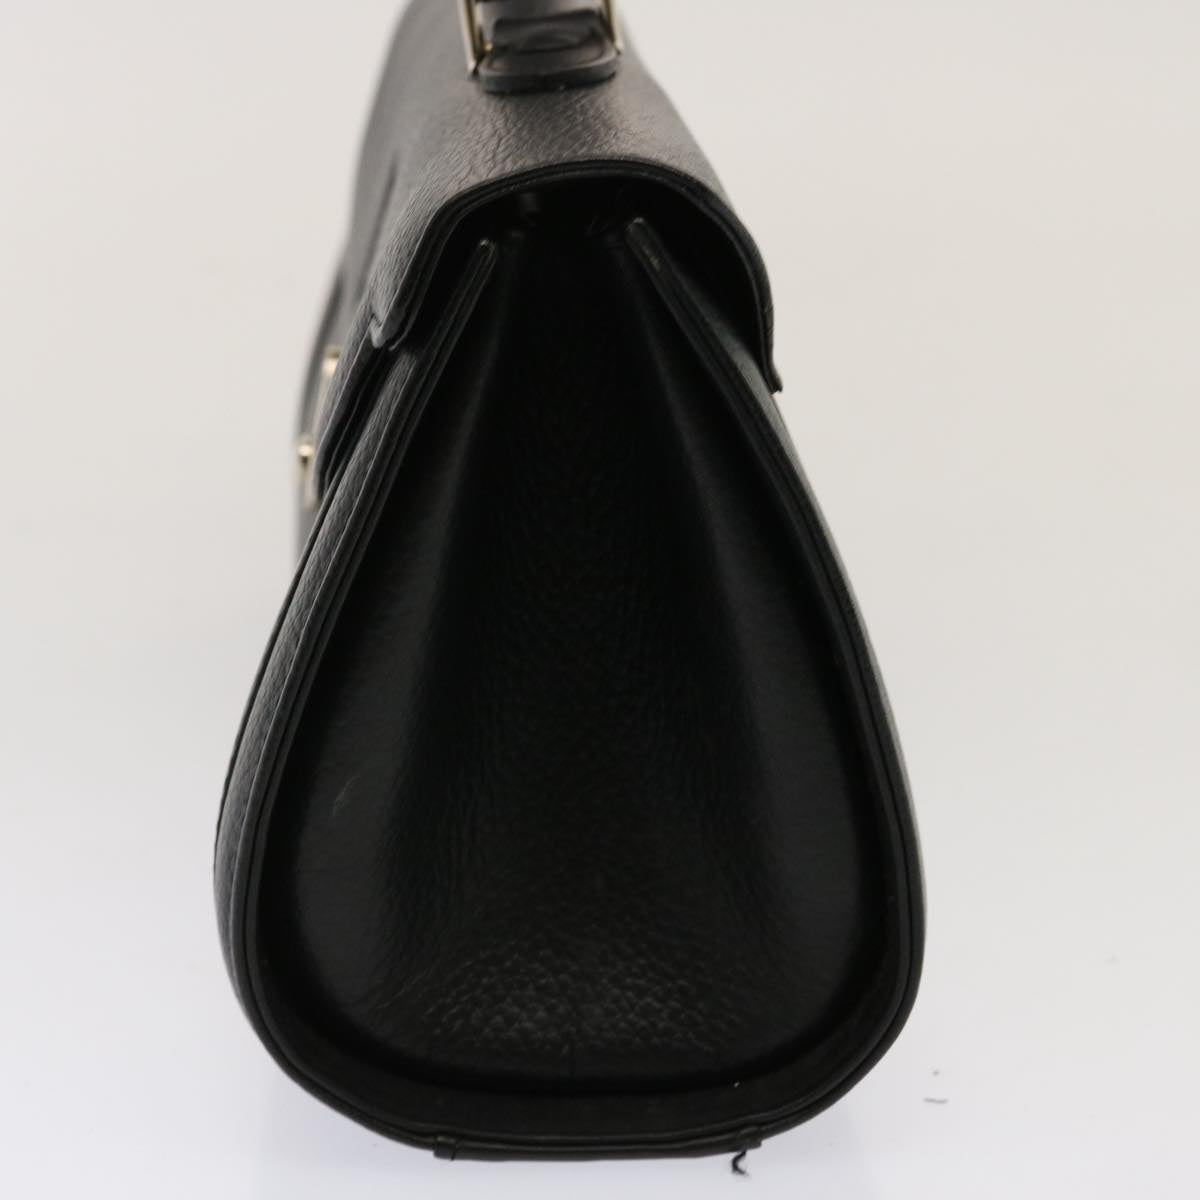 Burberrys Hand Bag Leather Black Auth bs13979